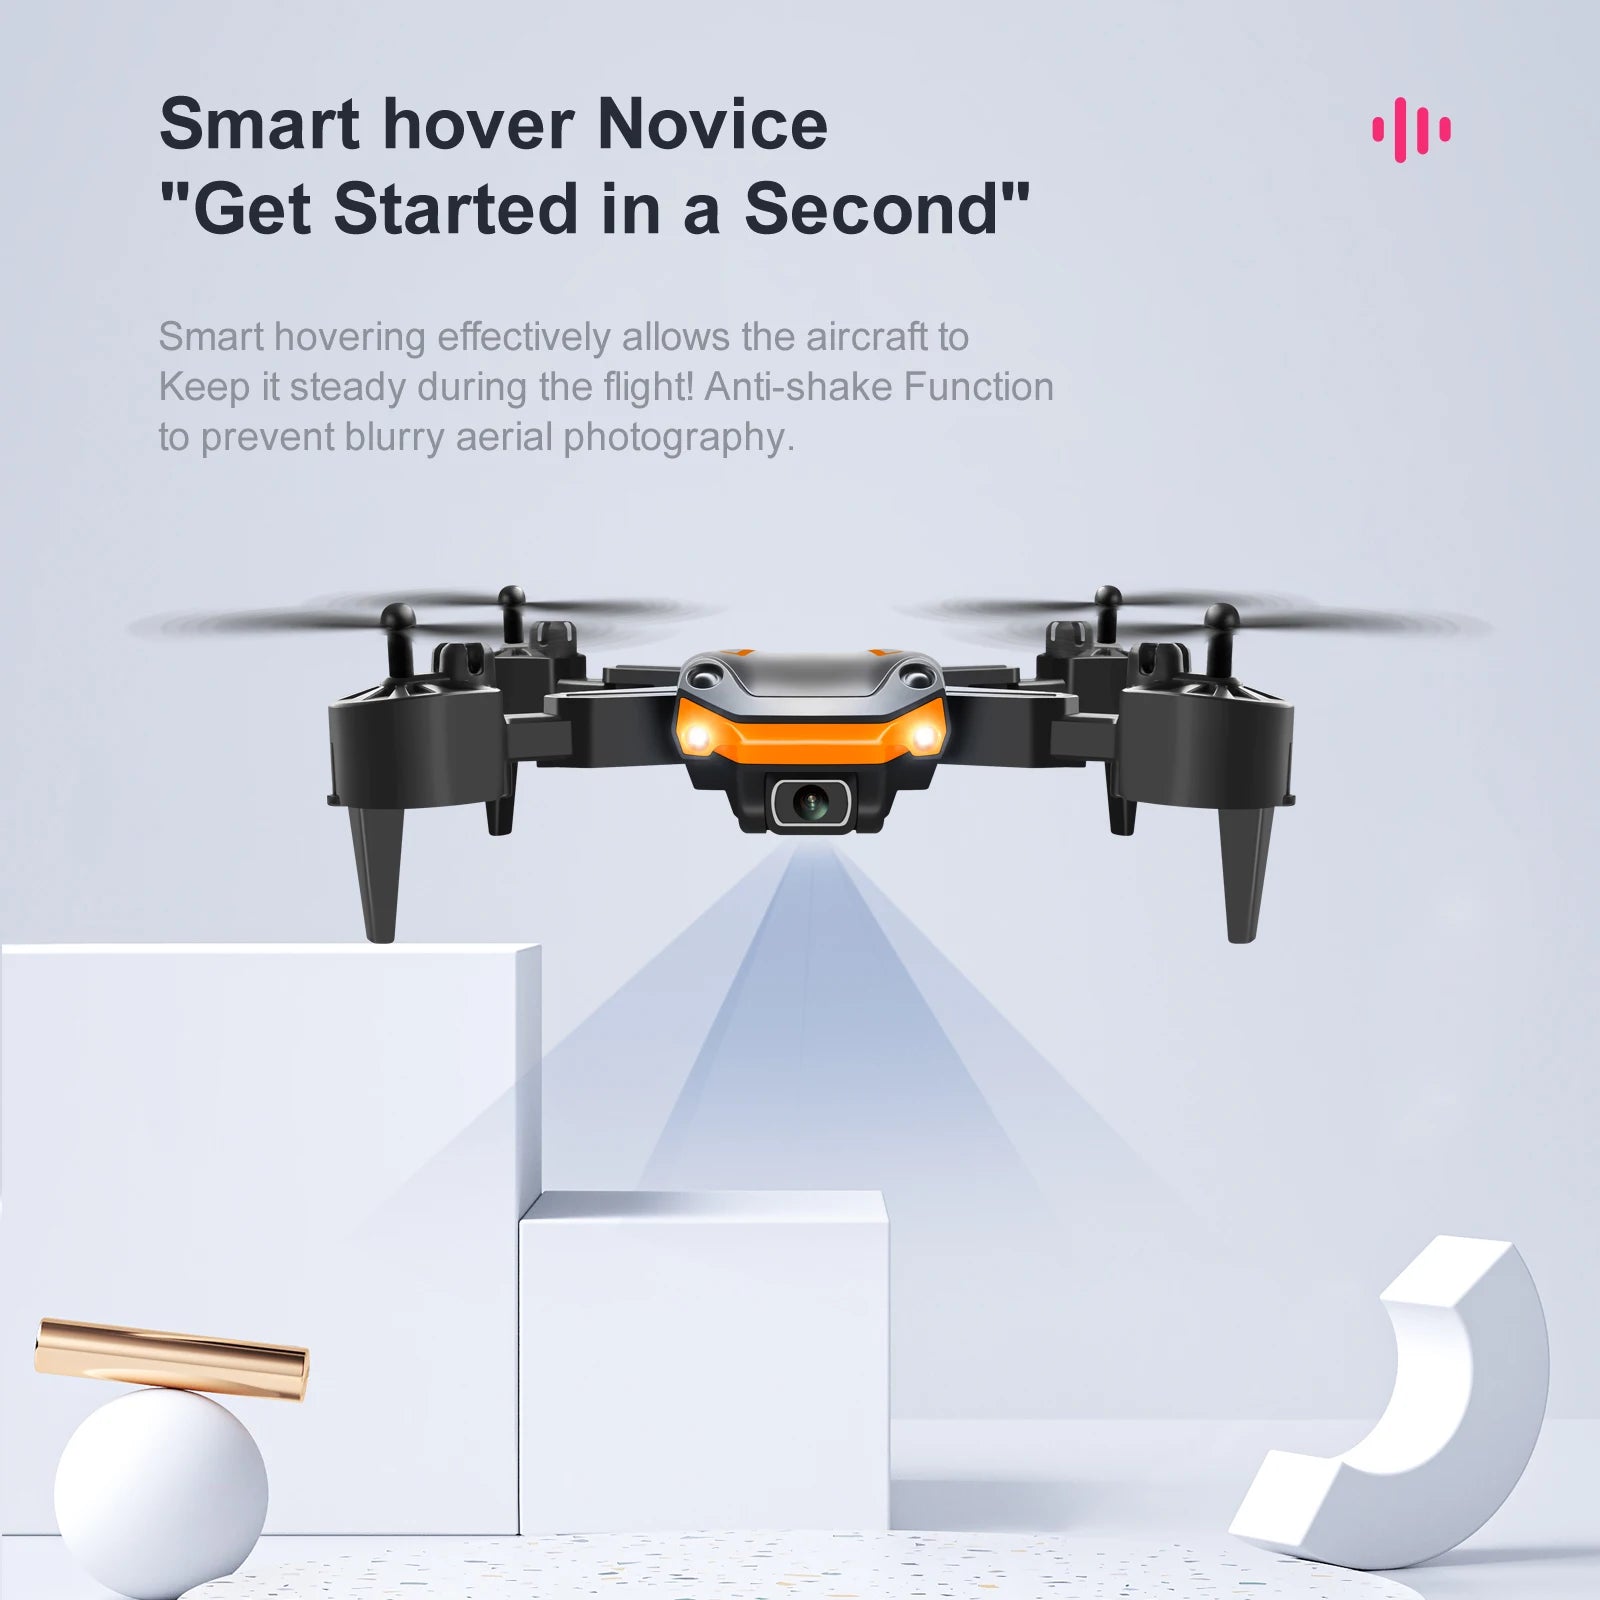 XYRC New KY603 Mini Drone, smart hover novice "get started in a second" smart hovering